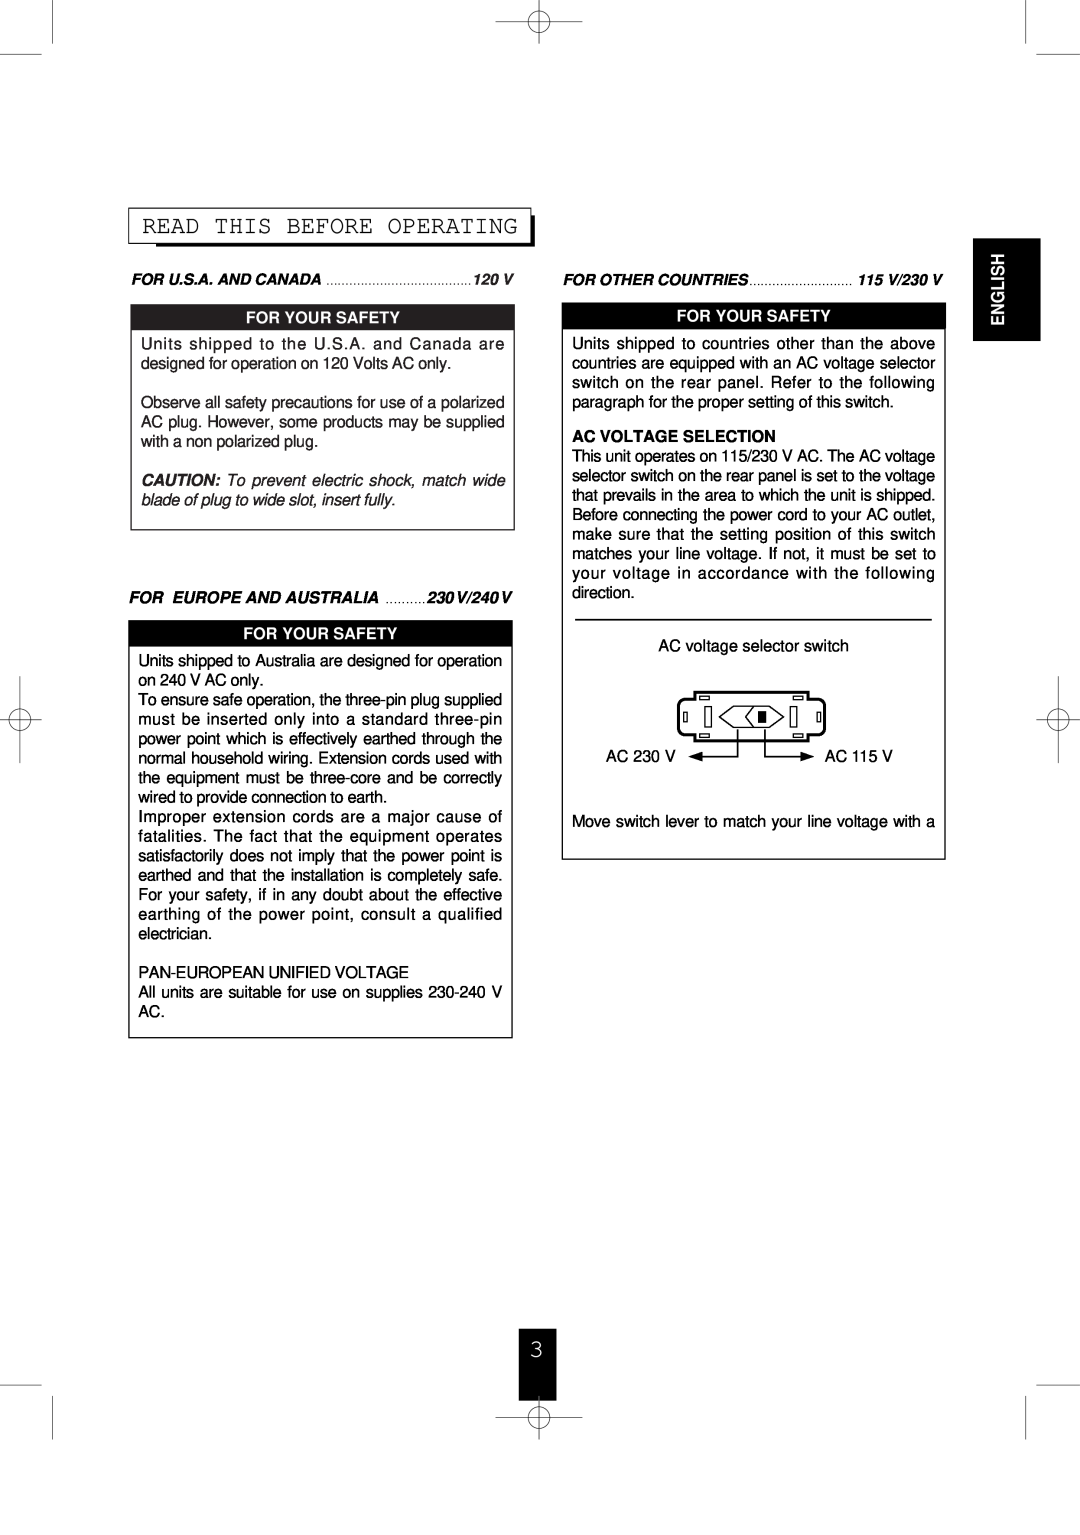 Sherwood R-956 manual Read This Before Operating, English, For Your Safety, For Europe And Australia 